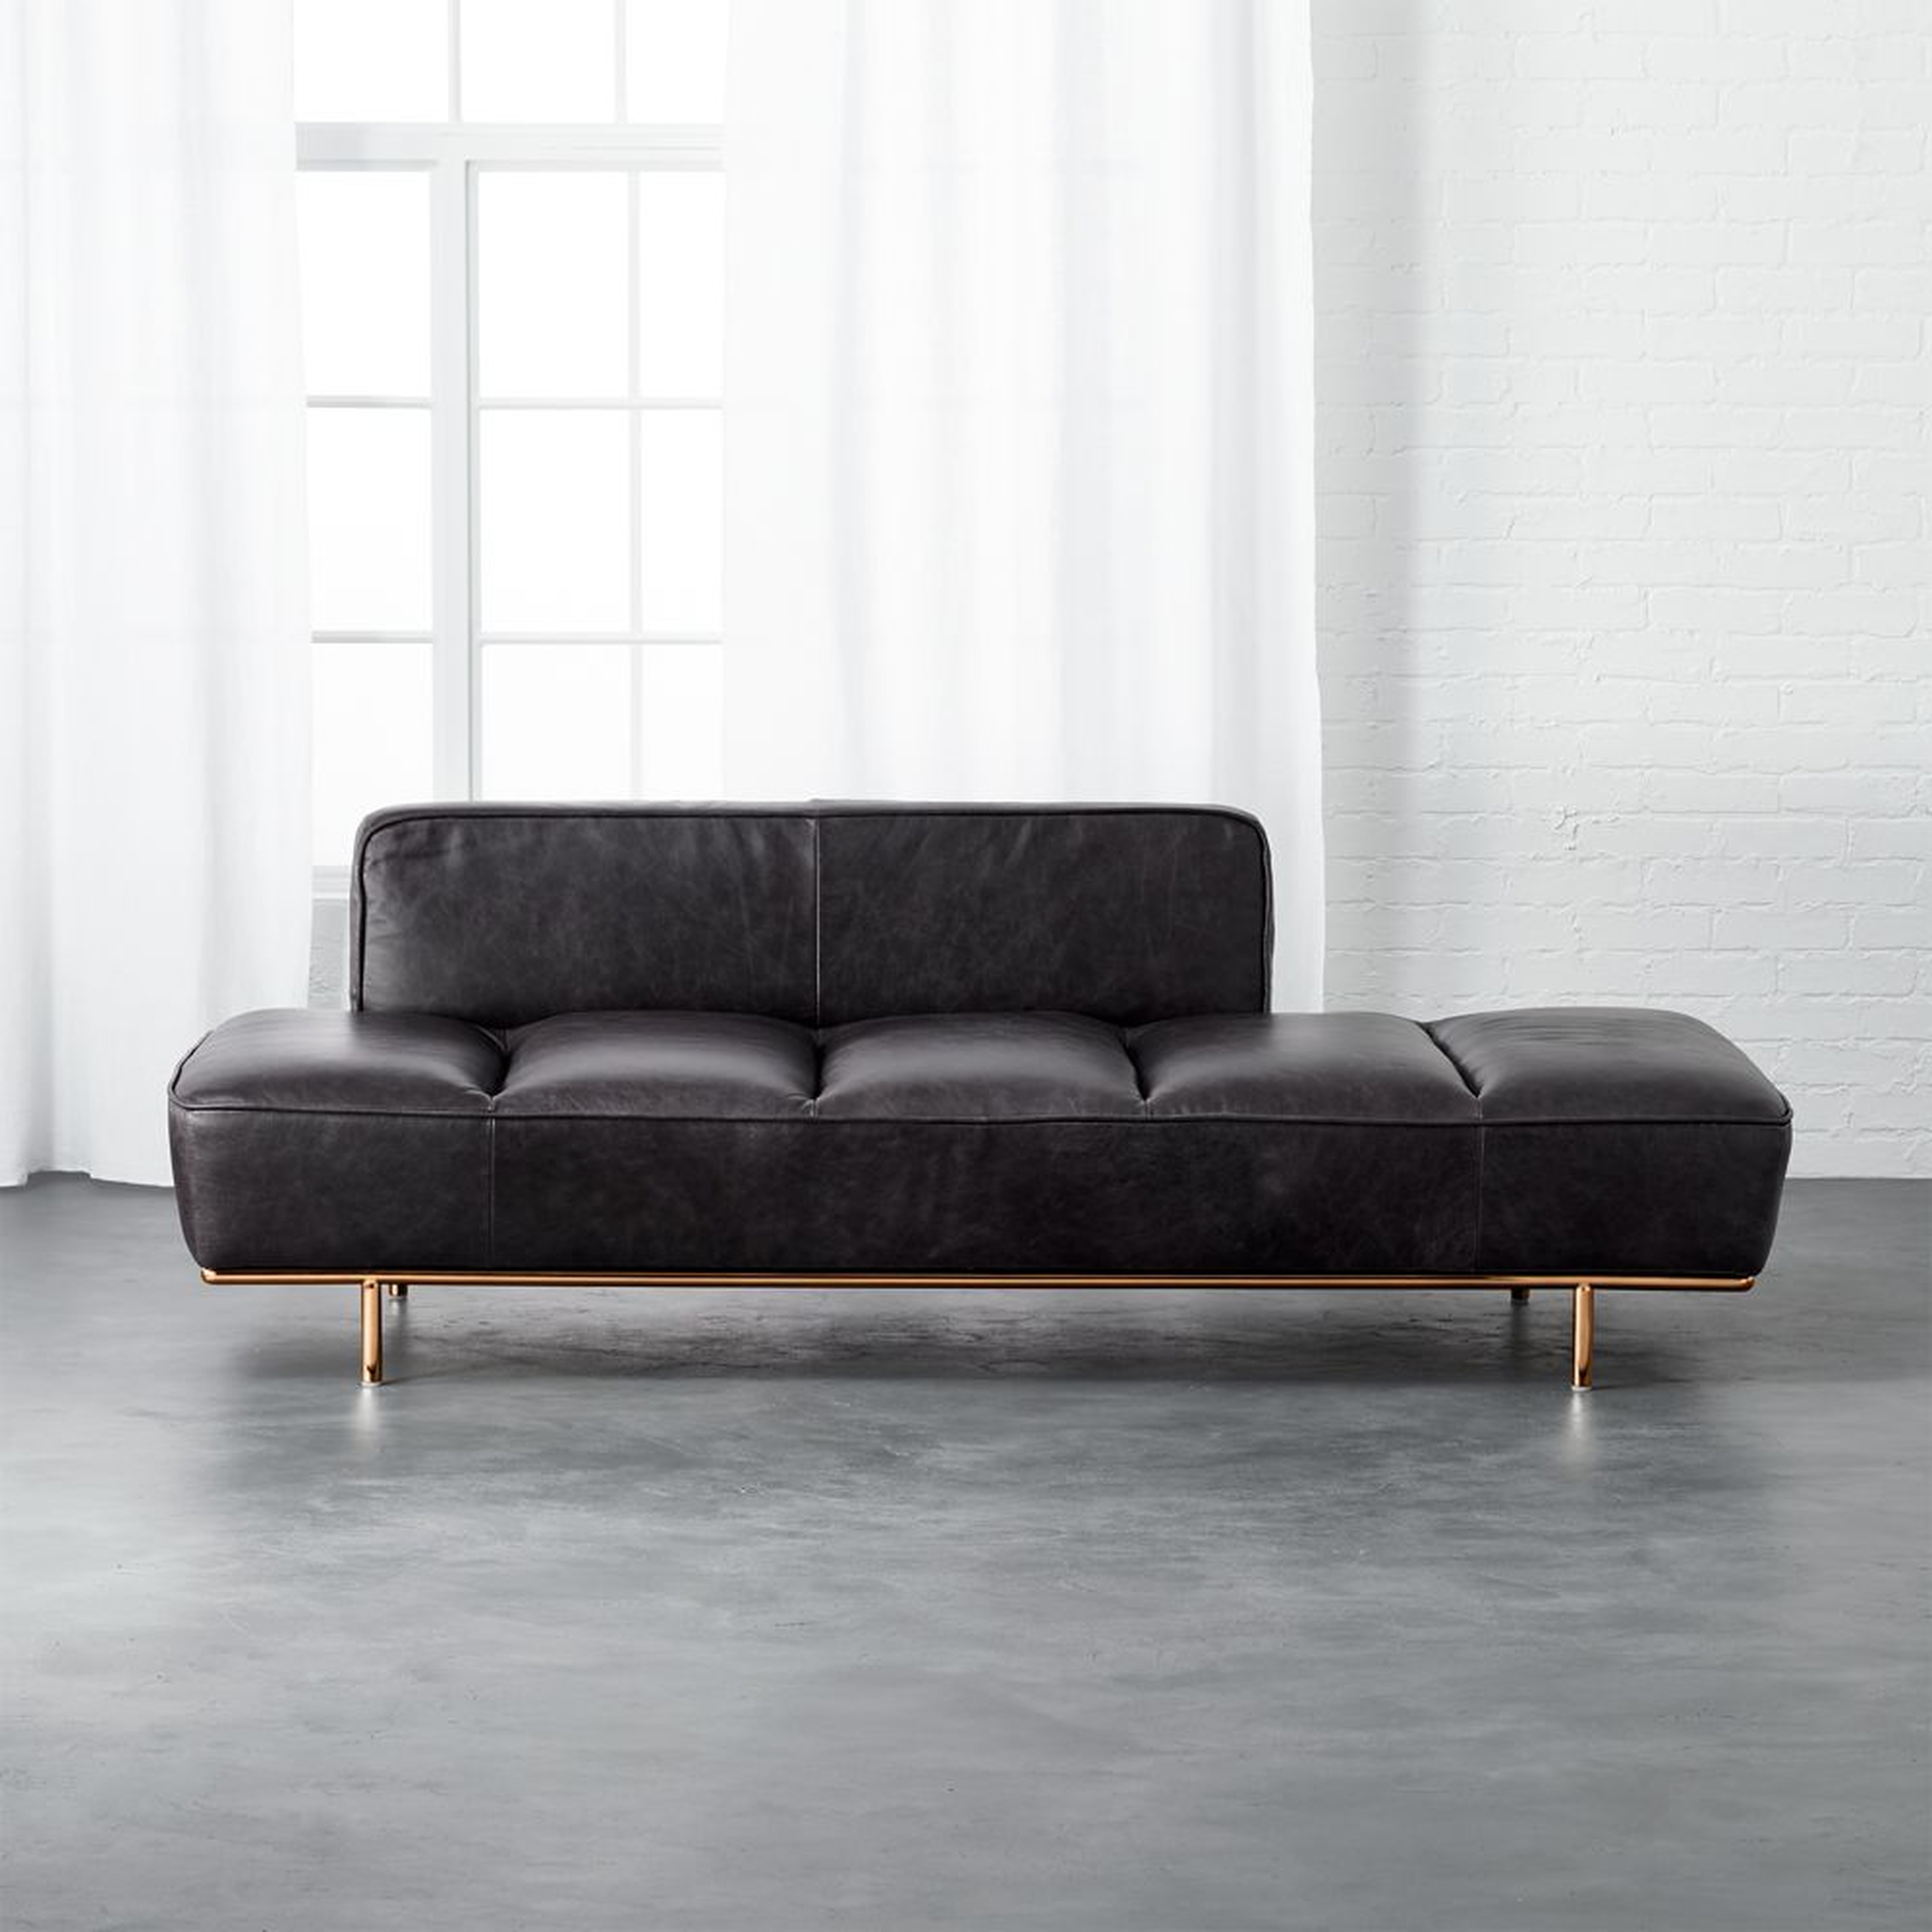 Lawndale Black Leather Daybed with Brass Base - CB2